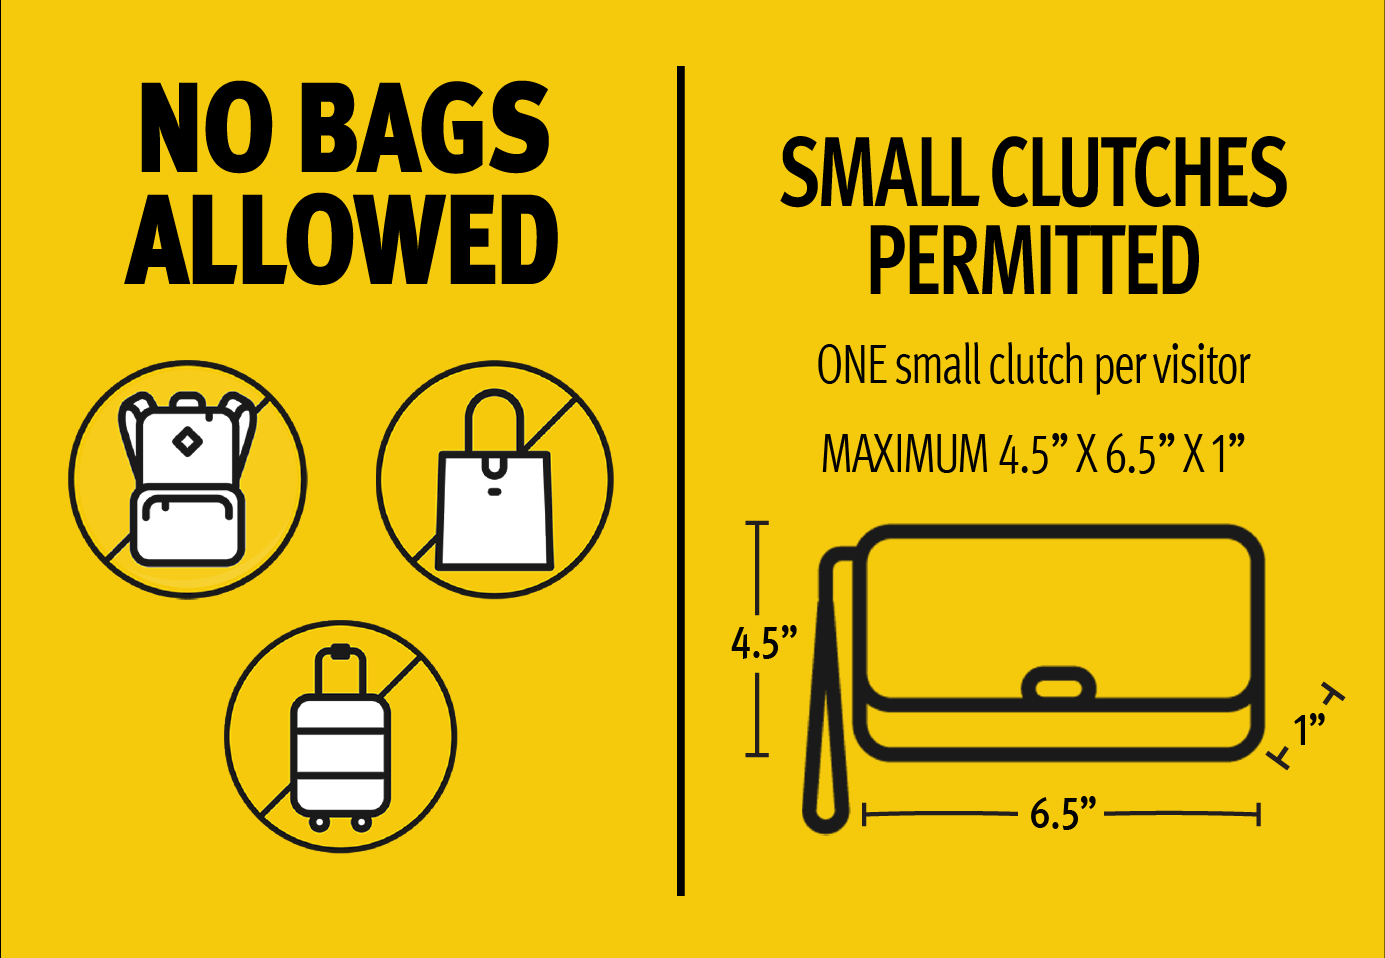 No Bags Allowed, small clutches permitted (4.5" x 6.5" or less)